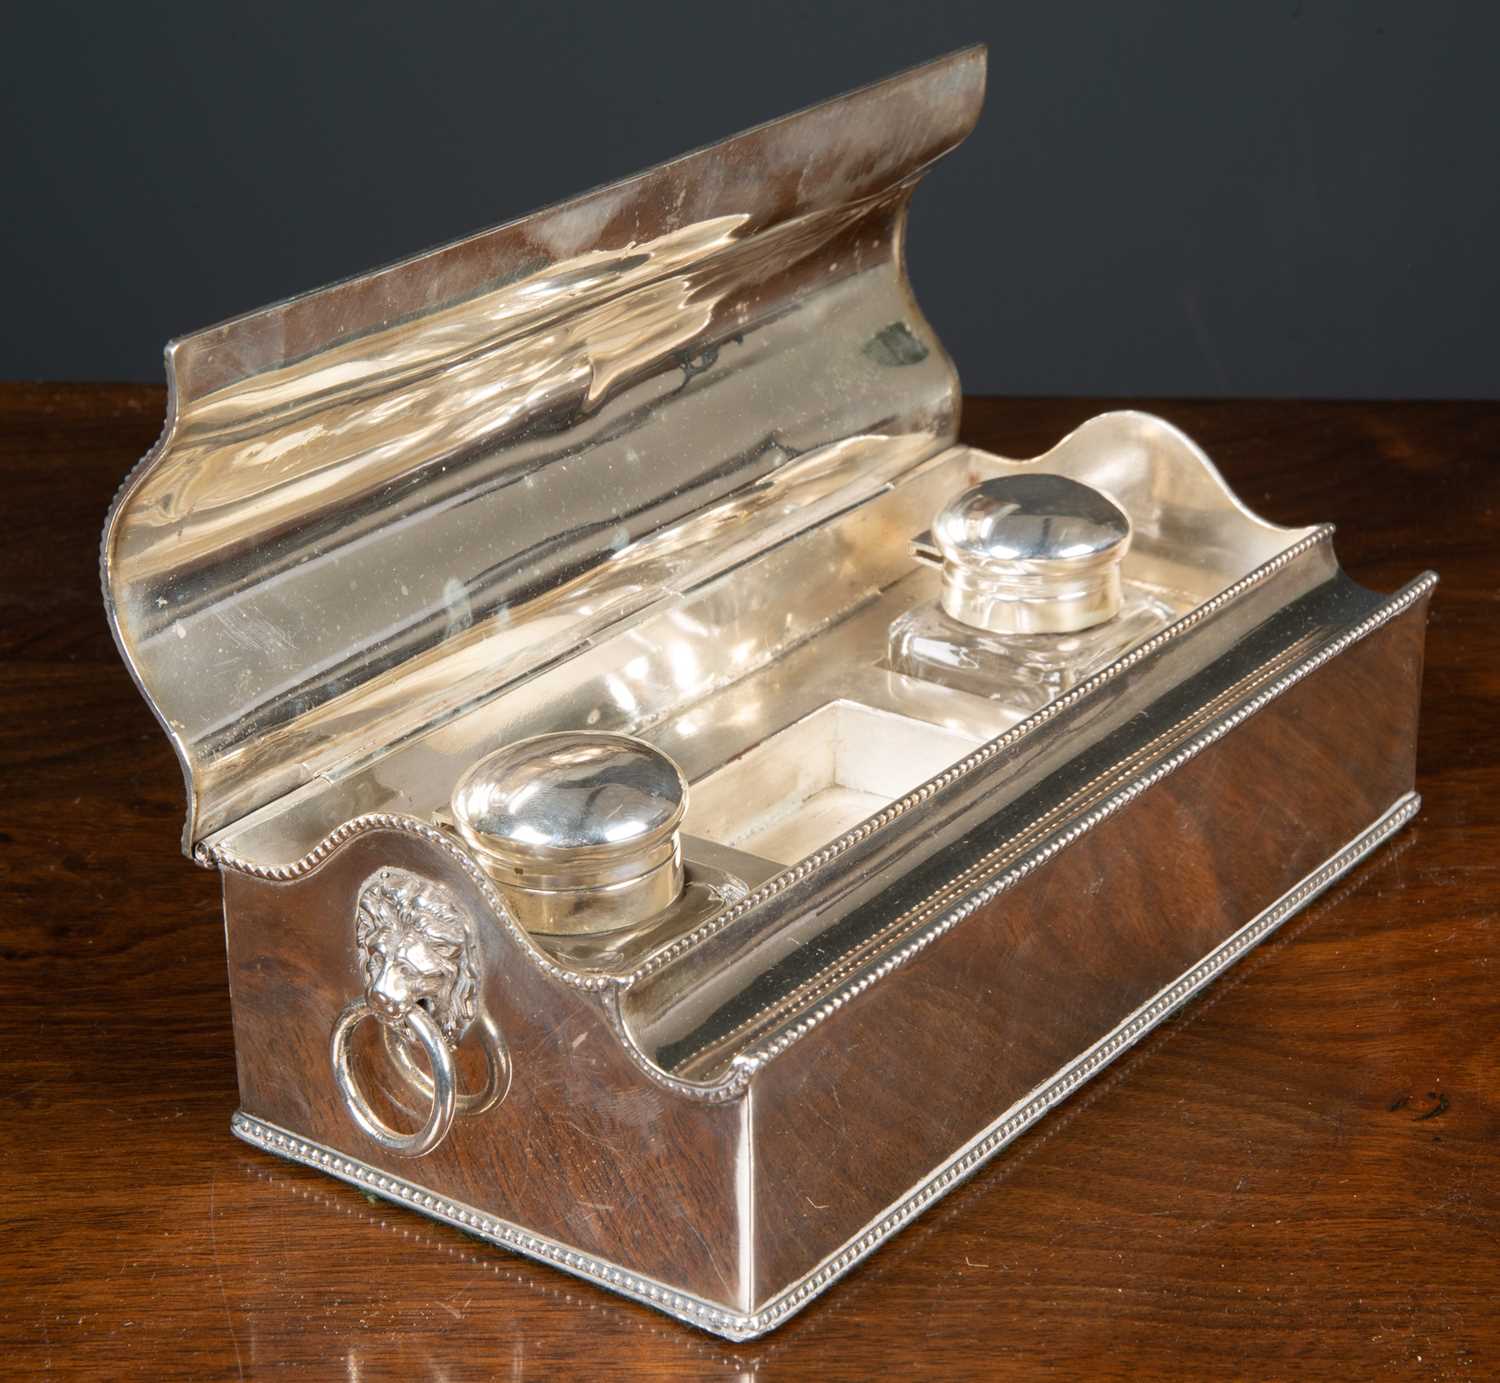 A 19th century silver plated casket form desk stand, containing two cut glass and silver plated - Image 2 of 4